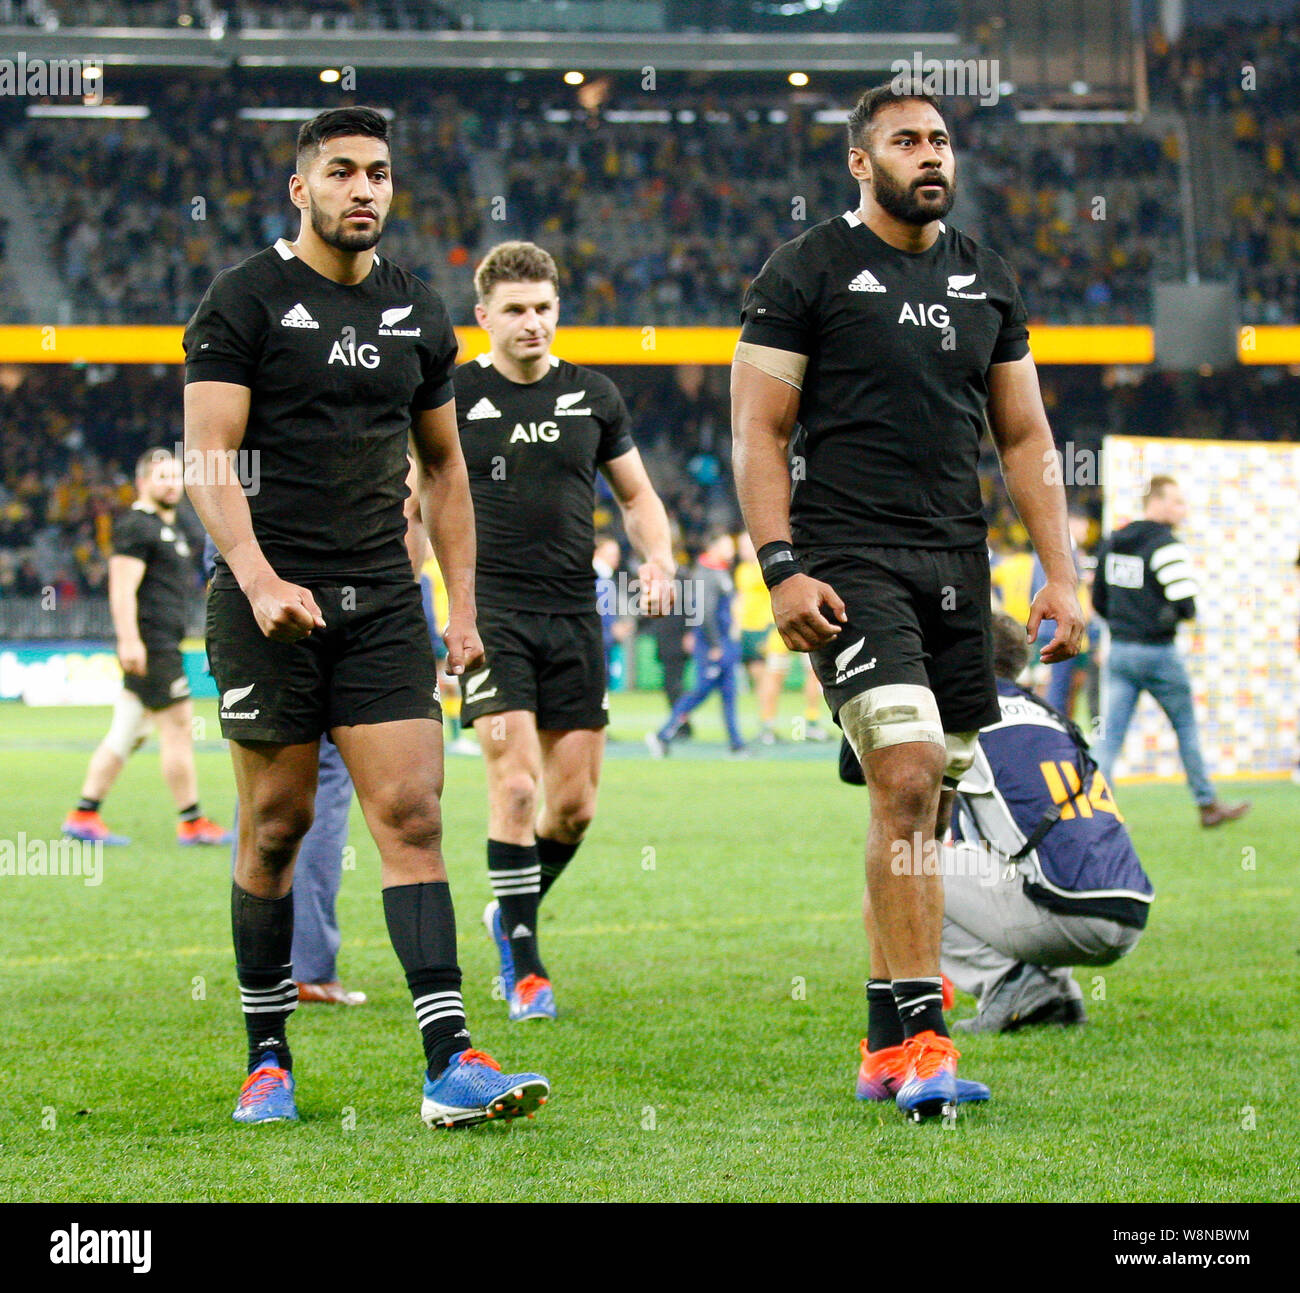 10th August 2019; ; Bledisloe Cup international rugby, Australia versus New Zealand mens; All Blacks players leave the field after their loss to the Wallabies by 47-26